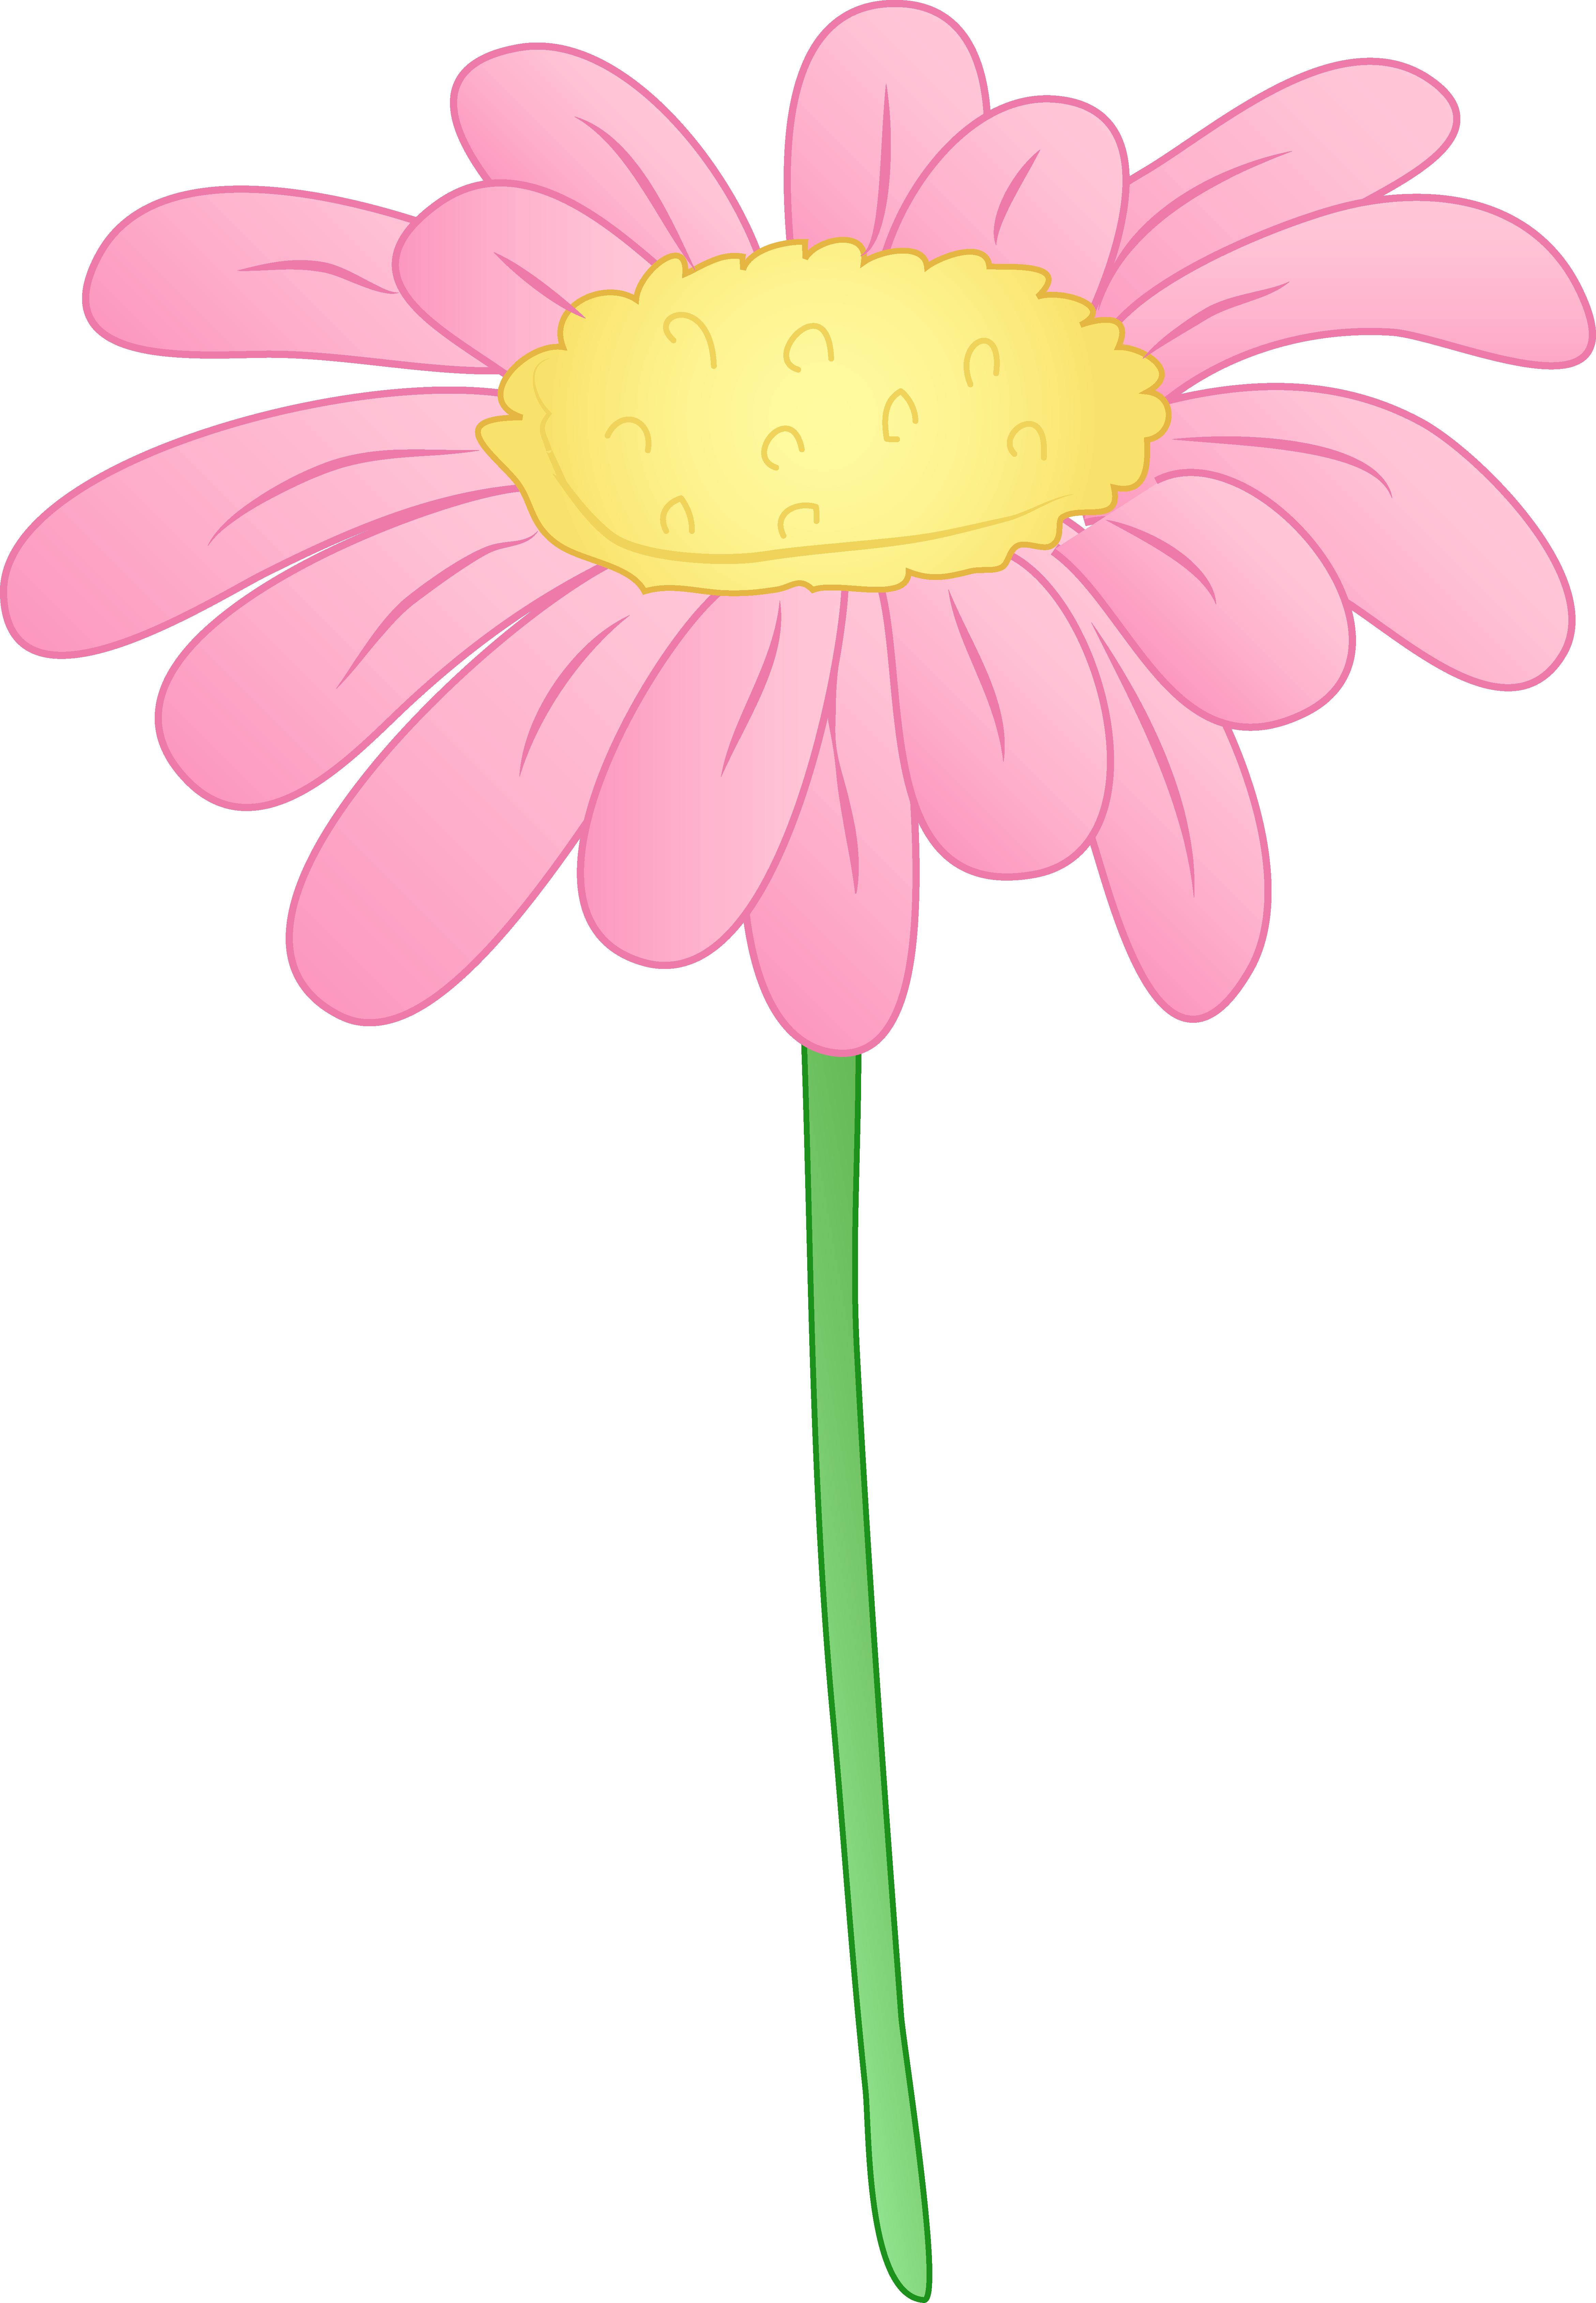 Daisy Clip Art Border | Clipart library - Free Clipart Images